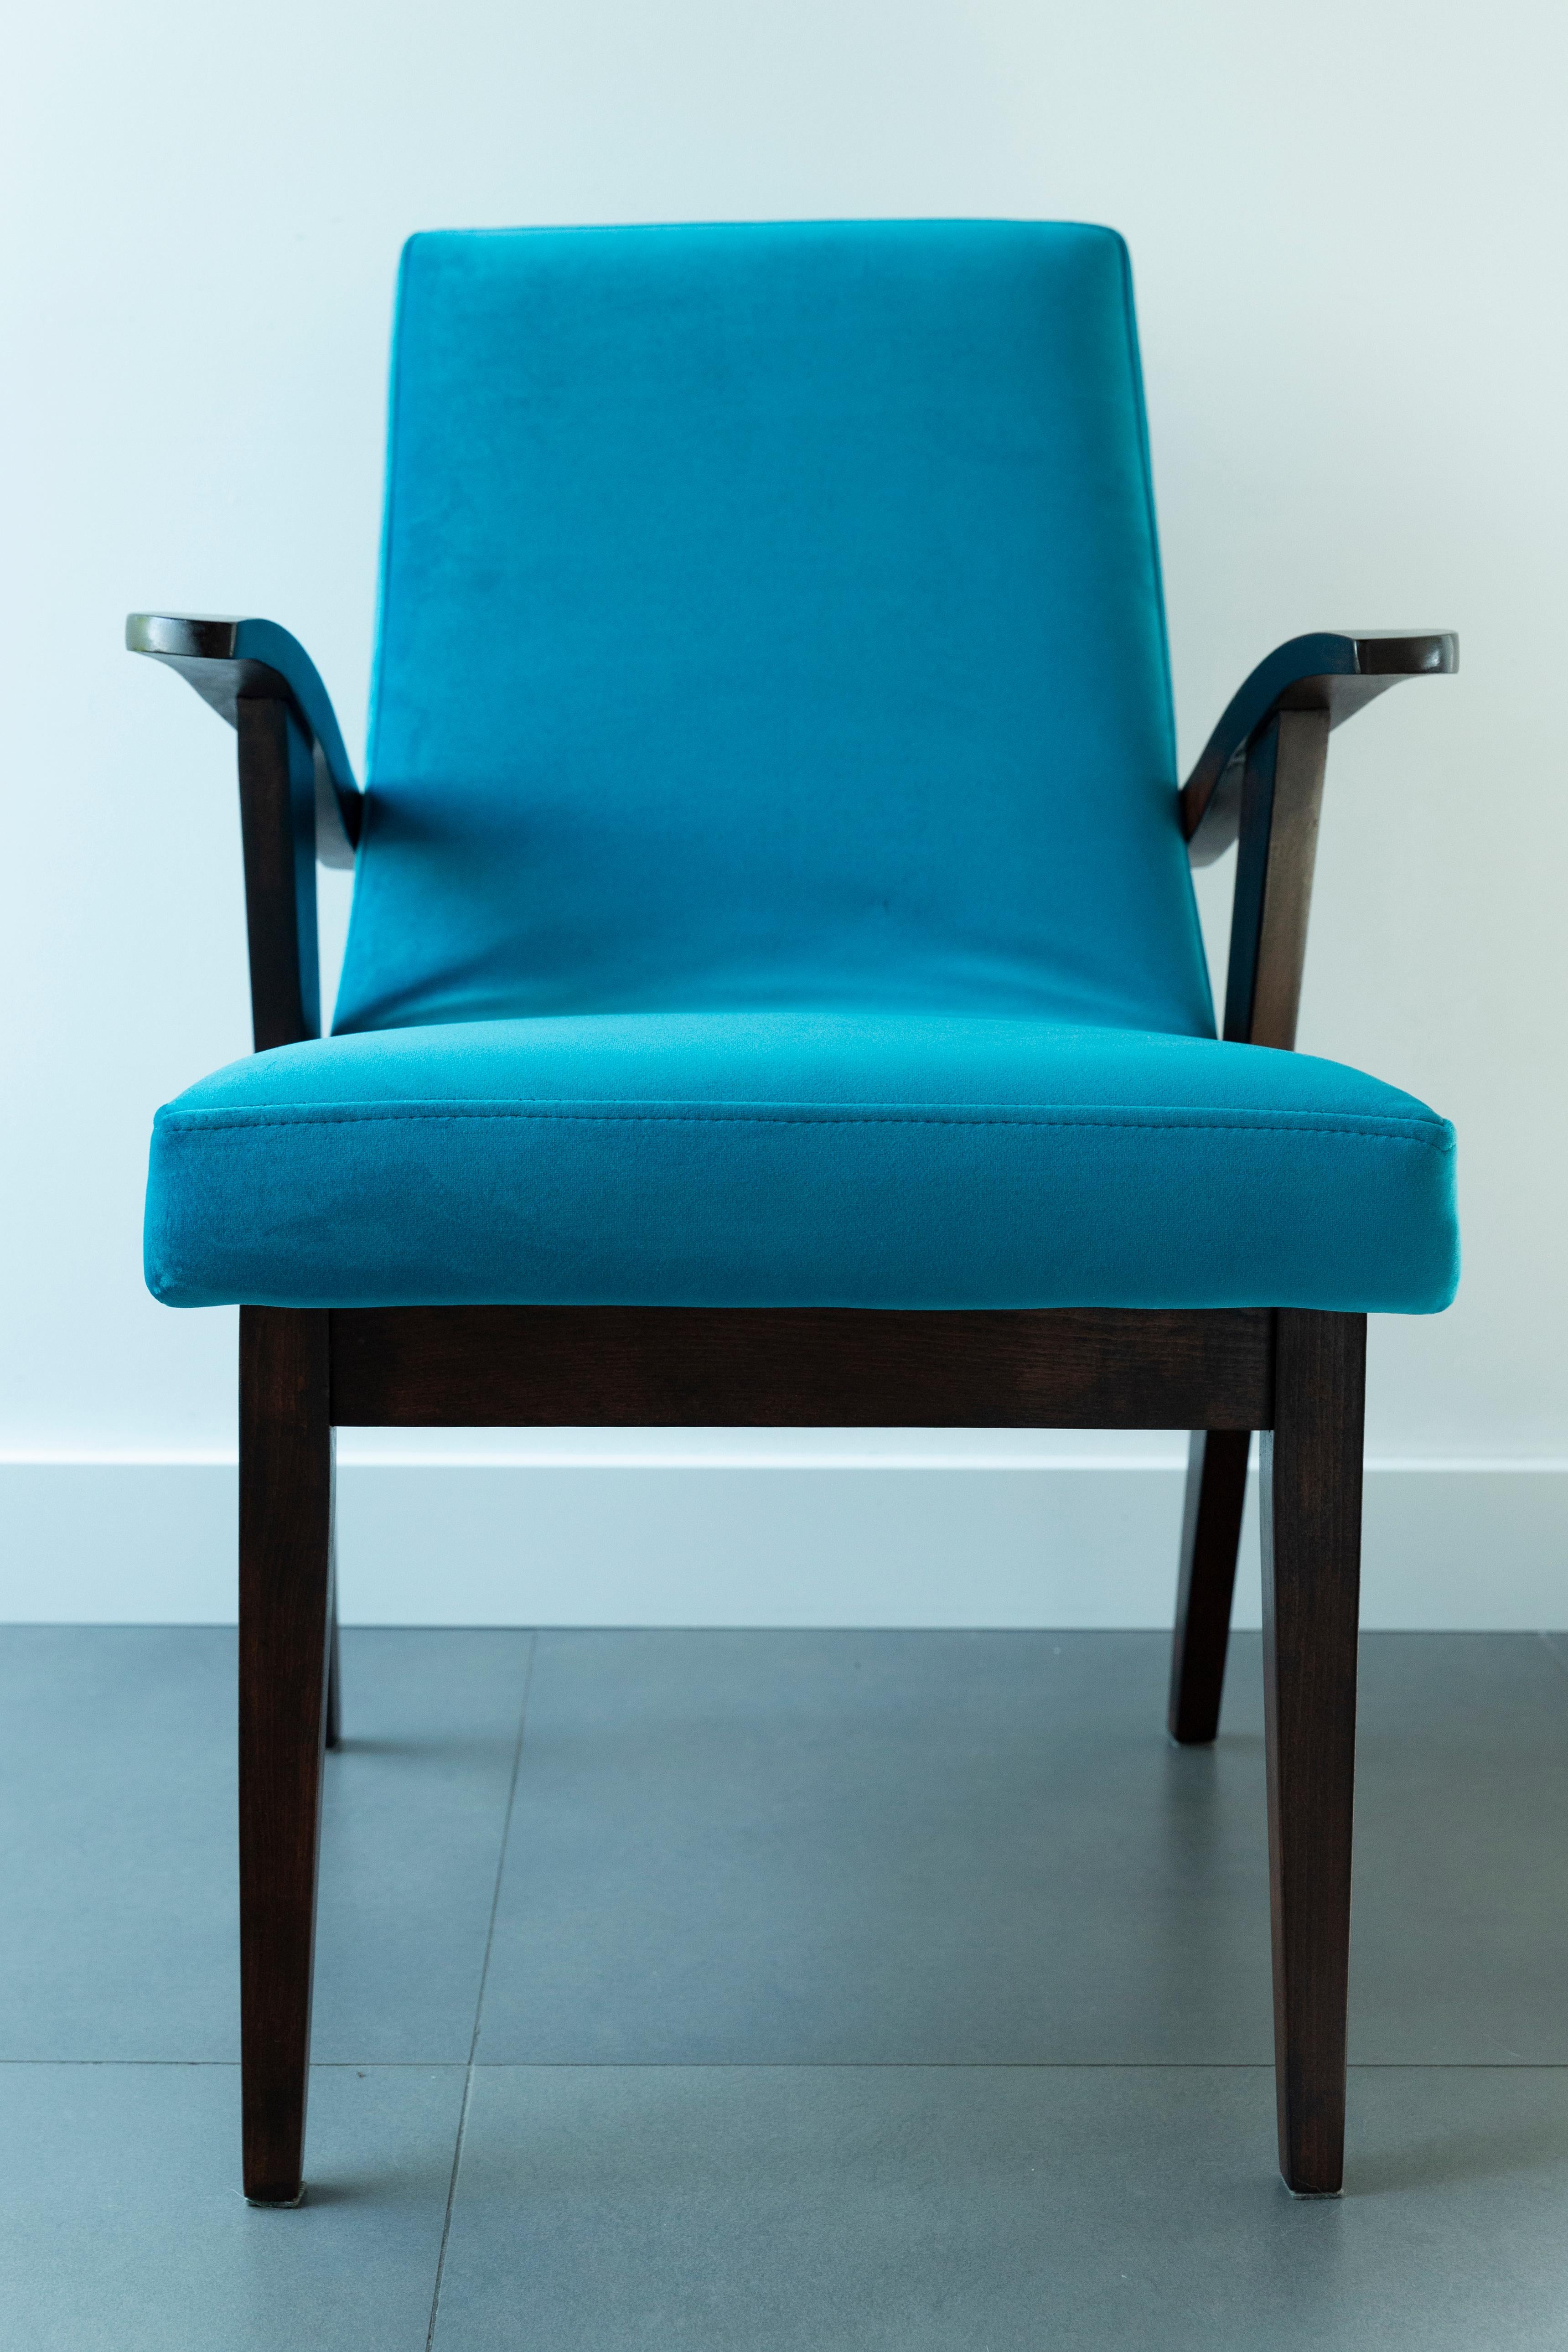 Set of Four Vintage Chairs in Blue Velvet by Mieczyslaw Puchala, 1960s For Sale 4